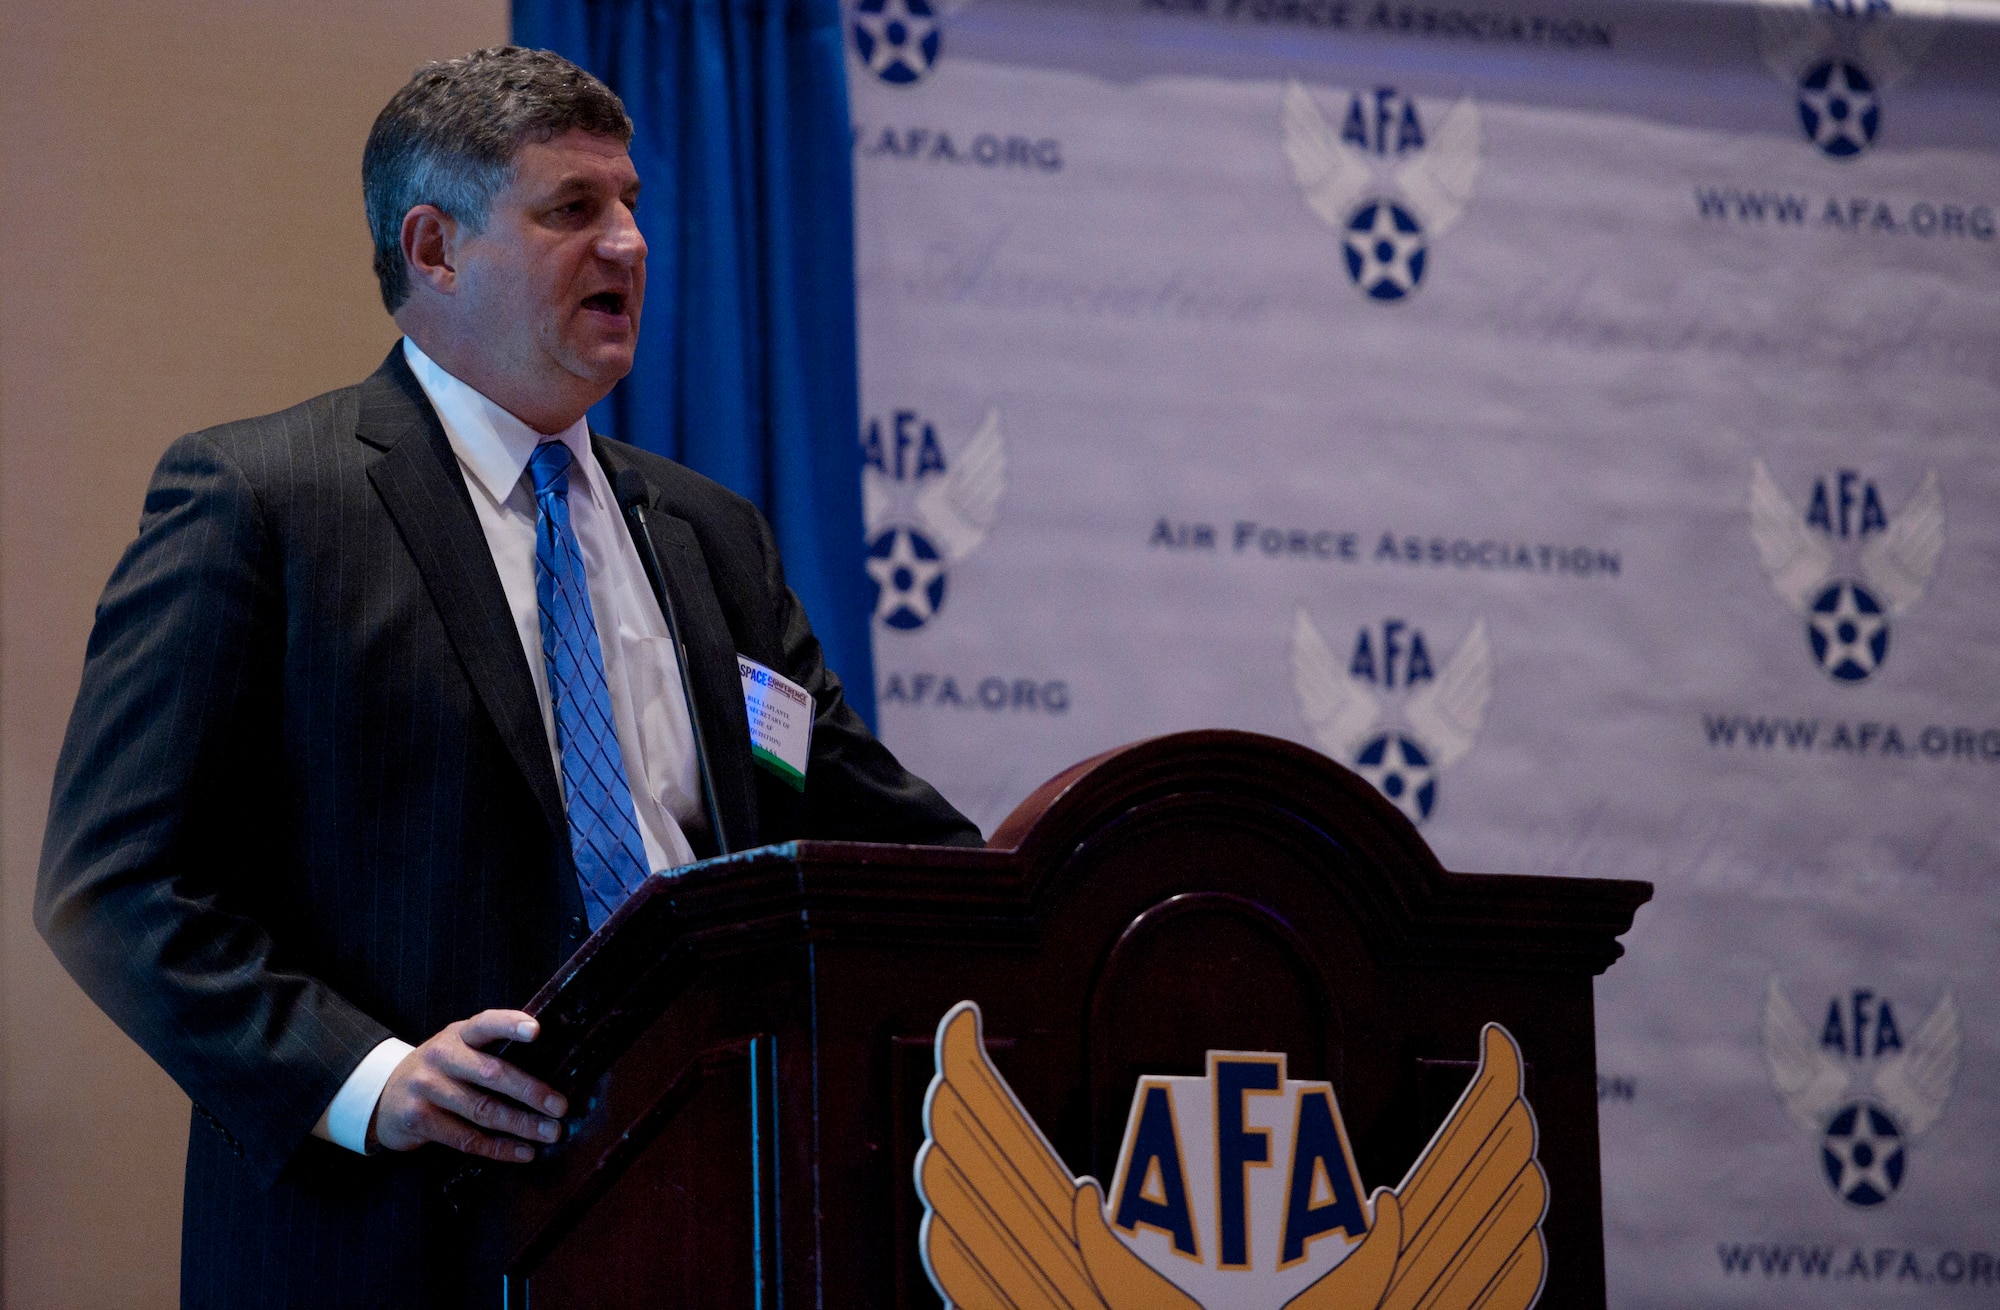 Dr. William LaPlante talks to attendees about Air Force acquisition during the 2014 Air Force Association's Air & Space Conference and Technology Exposition Sept. 16, 2014, in Washington D.C. LaPlante is the assistant secretary of Air Force acquisition. He directs more than $35 billion annual investments that include major programs like the KC-46 Pegasus, F-22 Raptor, F-35 Lightning II, C-17 Globemaster, Space acquisitions, munitions, as well as capability areas such as information technology and command and control, intelligence, surveillance and reconnaissance, or C4ISR, systems. (U.S. Air Force photo/Staff Sgt. Anthony Nelson Jr.)